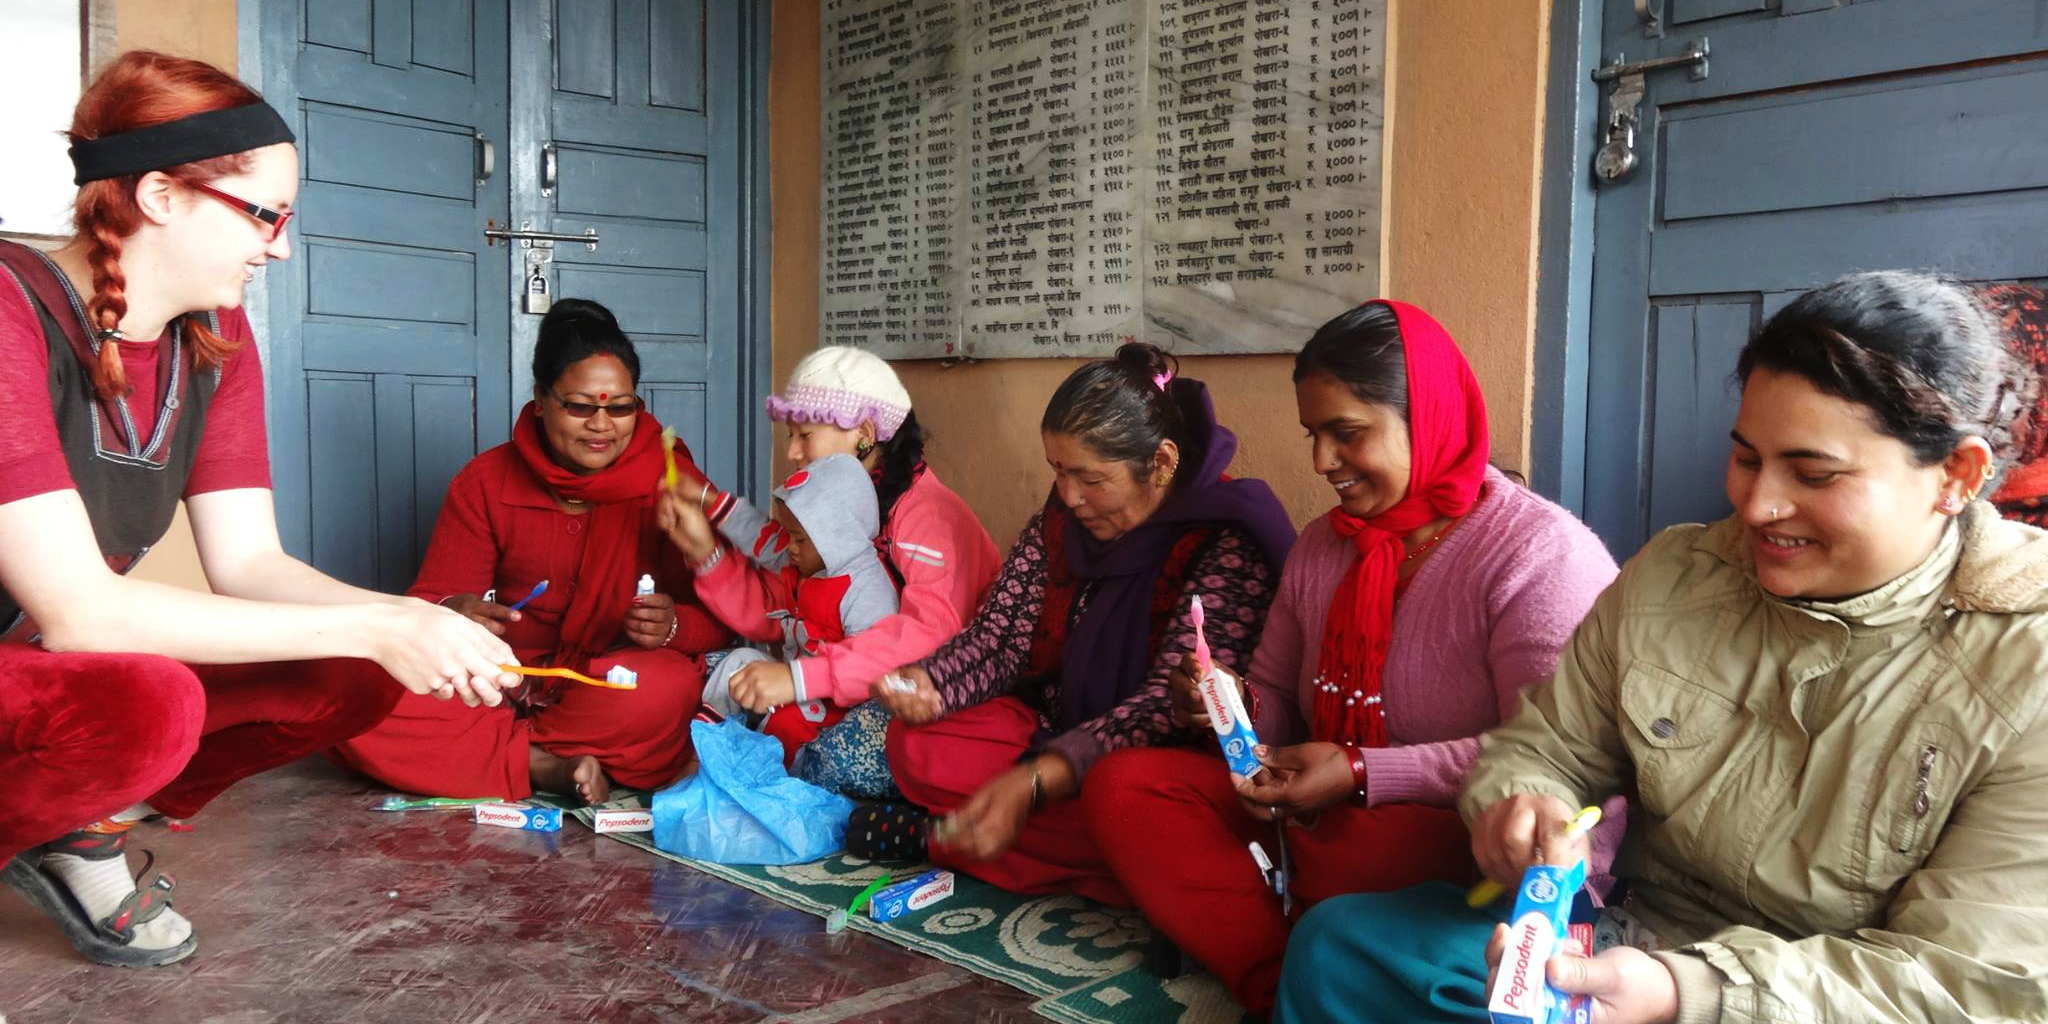 Heathcare volunteers conduct preventative healthcare workshops on toothcare in Pokhara, Nepal.